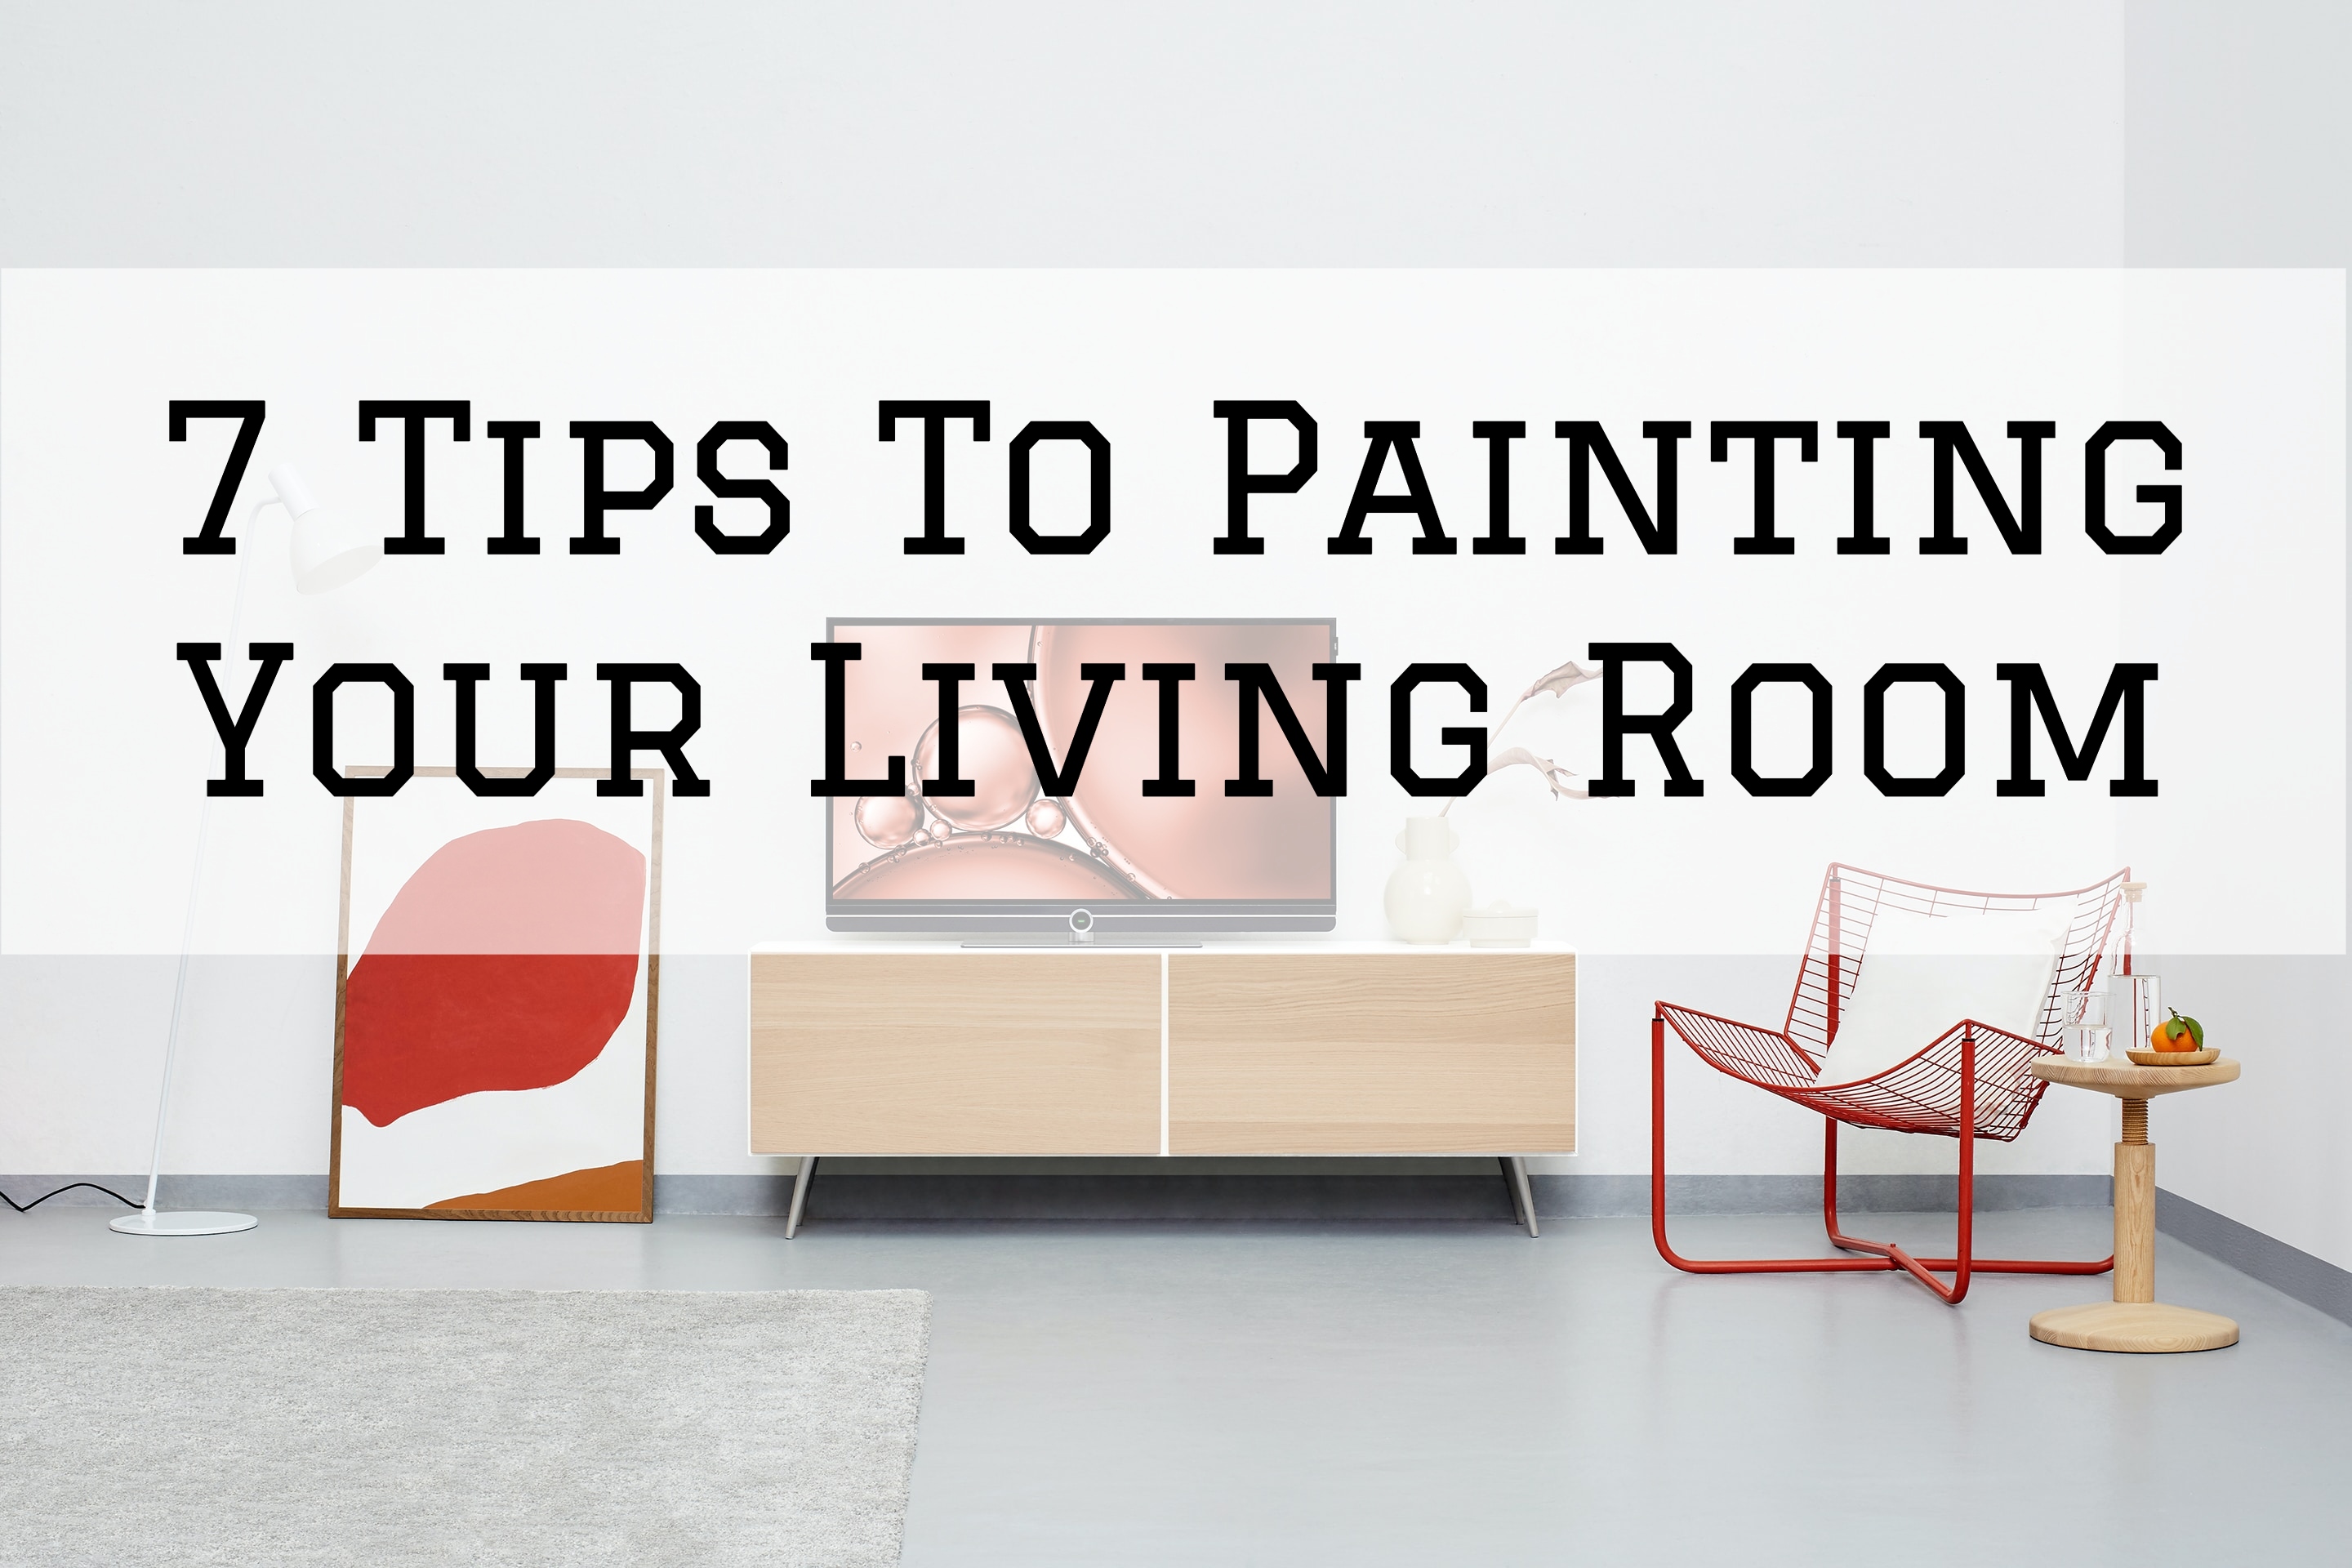 7 Tips To Painting Your Living Room in Omaha, NE